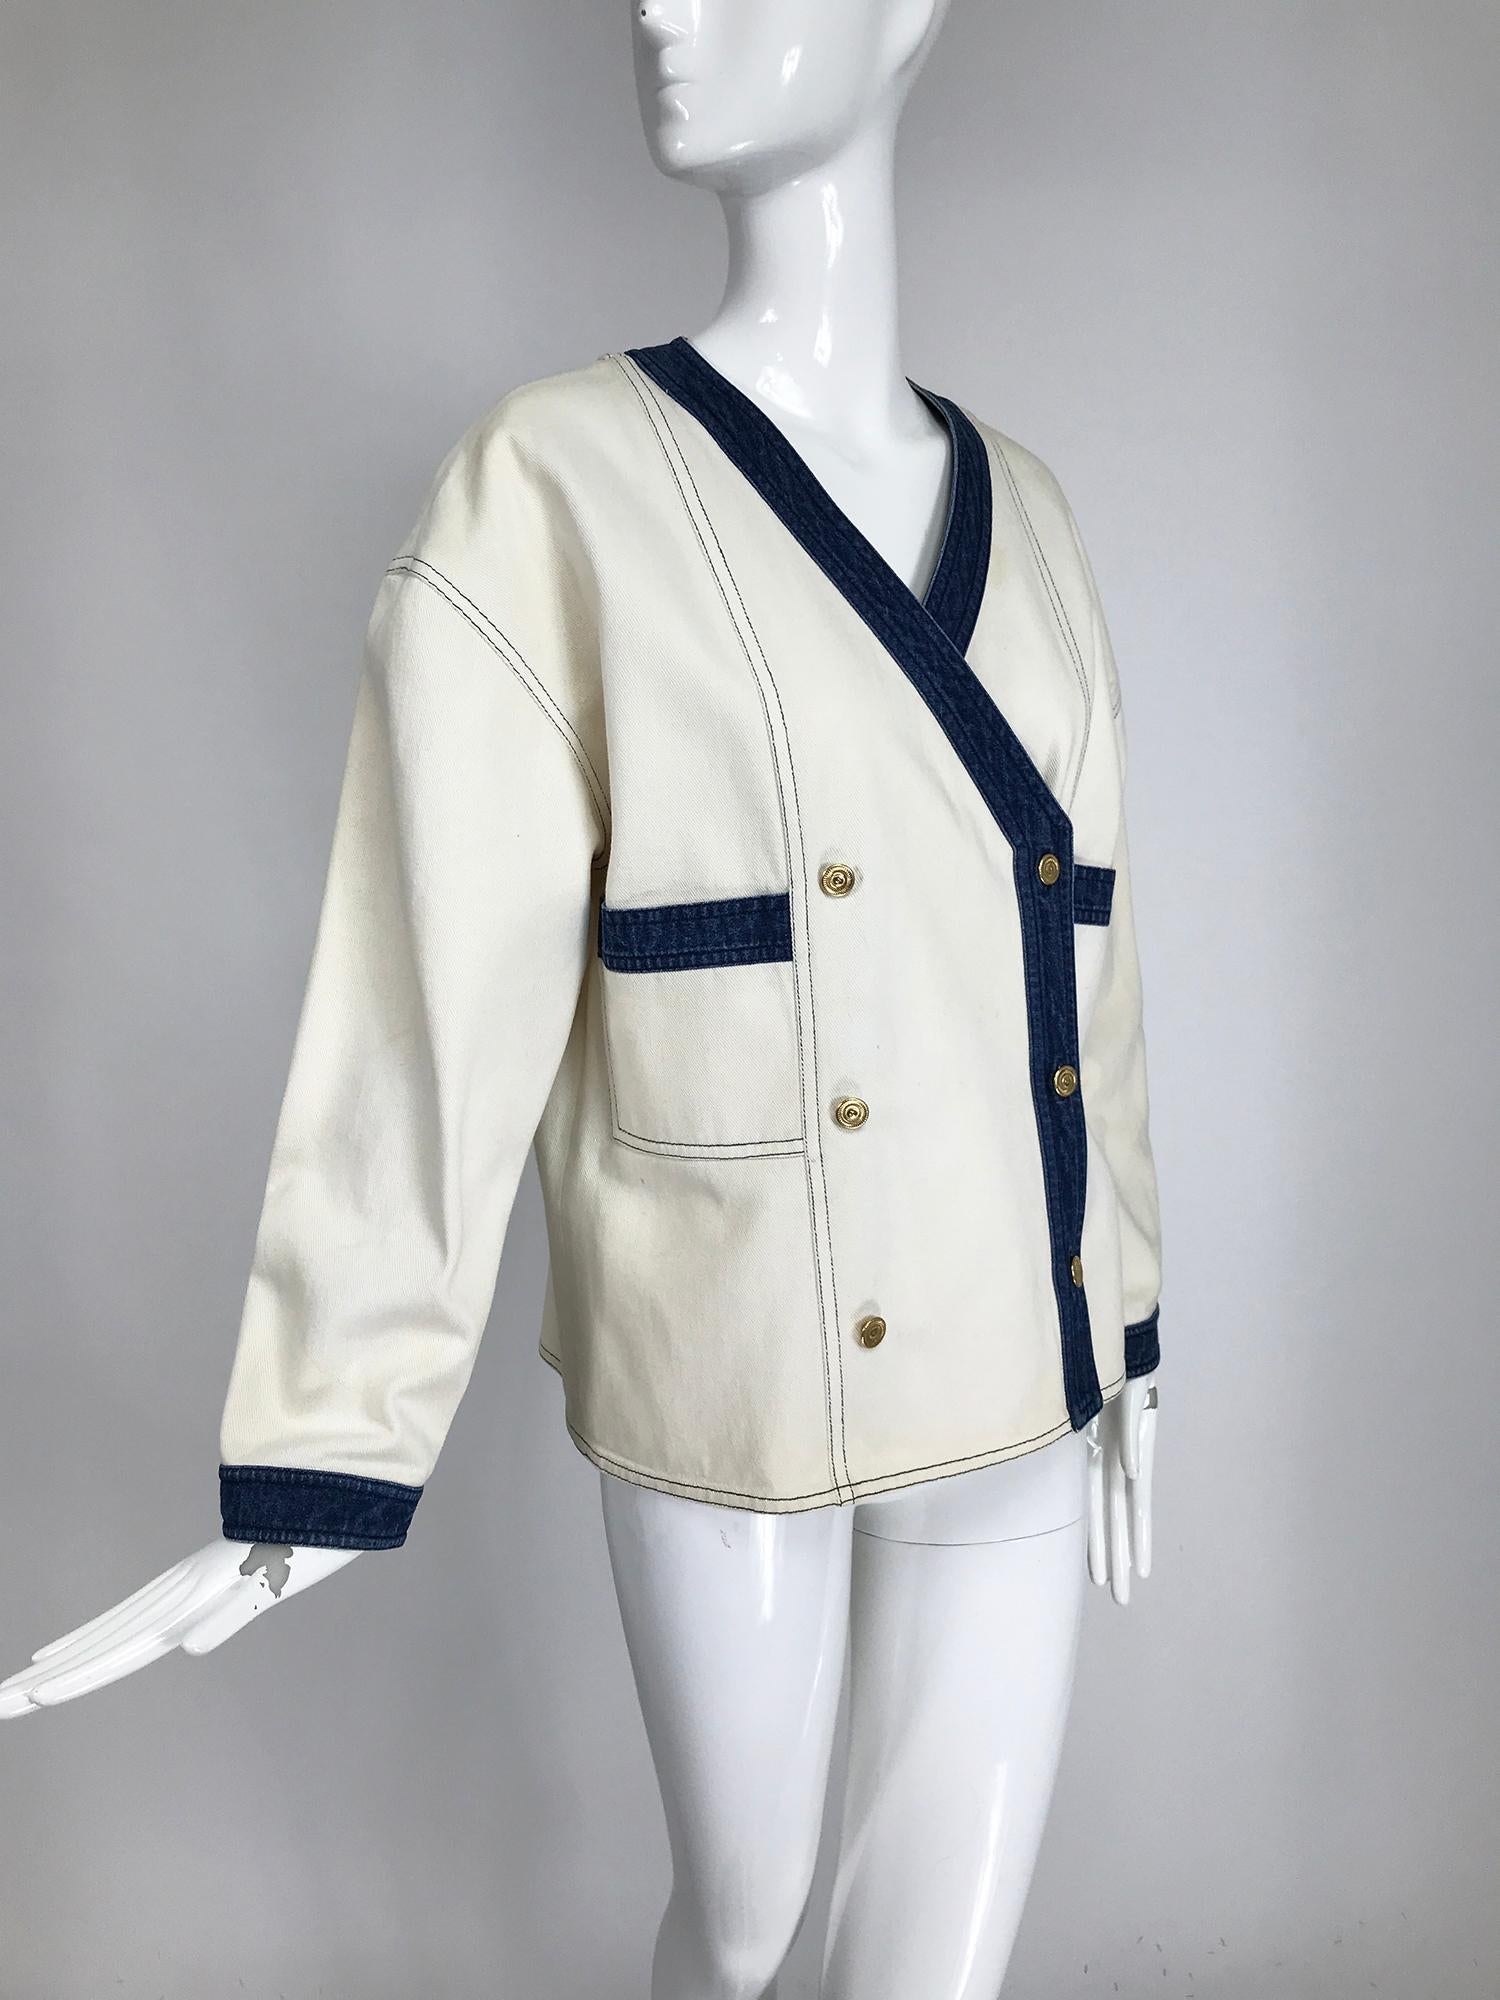 Vintage Chanel off white canvas and blue denim trimmed double breasted jacket from the 1980s. V neckline, long sleeves, jacket closes with Chanel gold logo buttons at the front. Front patch pockets. Unlined, with flat felled seams. Top stitch